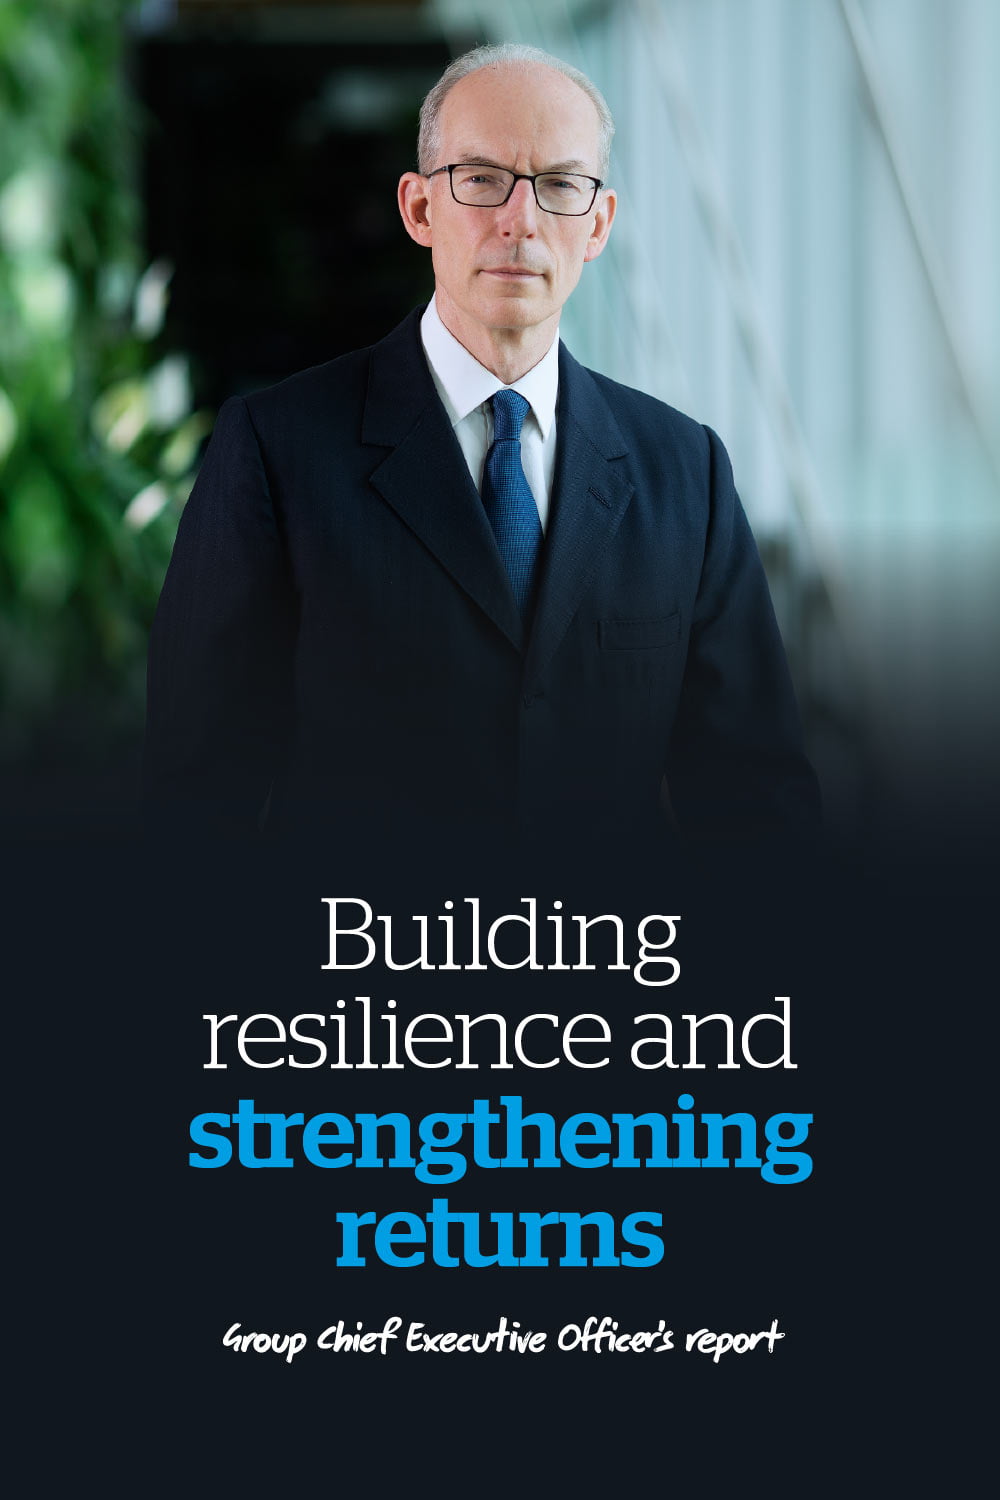 Andrew Horton - Group Chief Executive Officer's report - Building resilience and strengthening returns